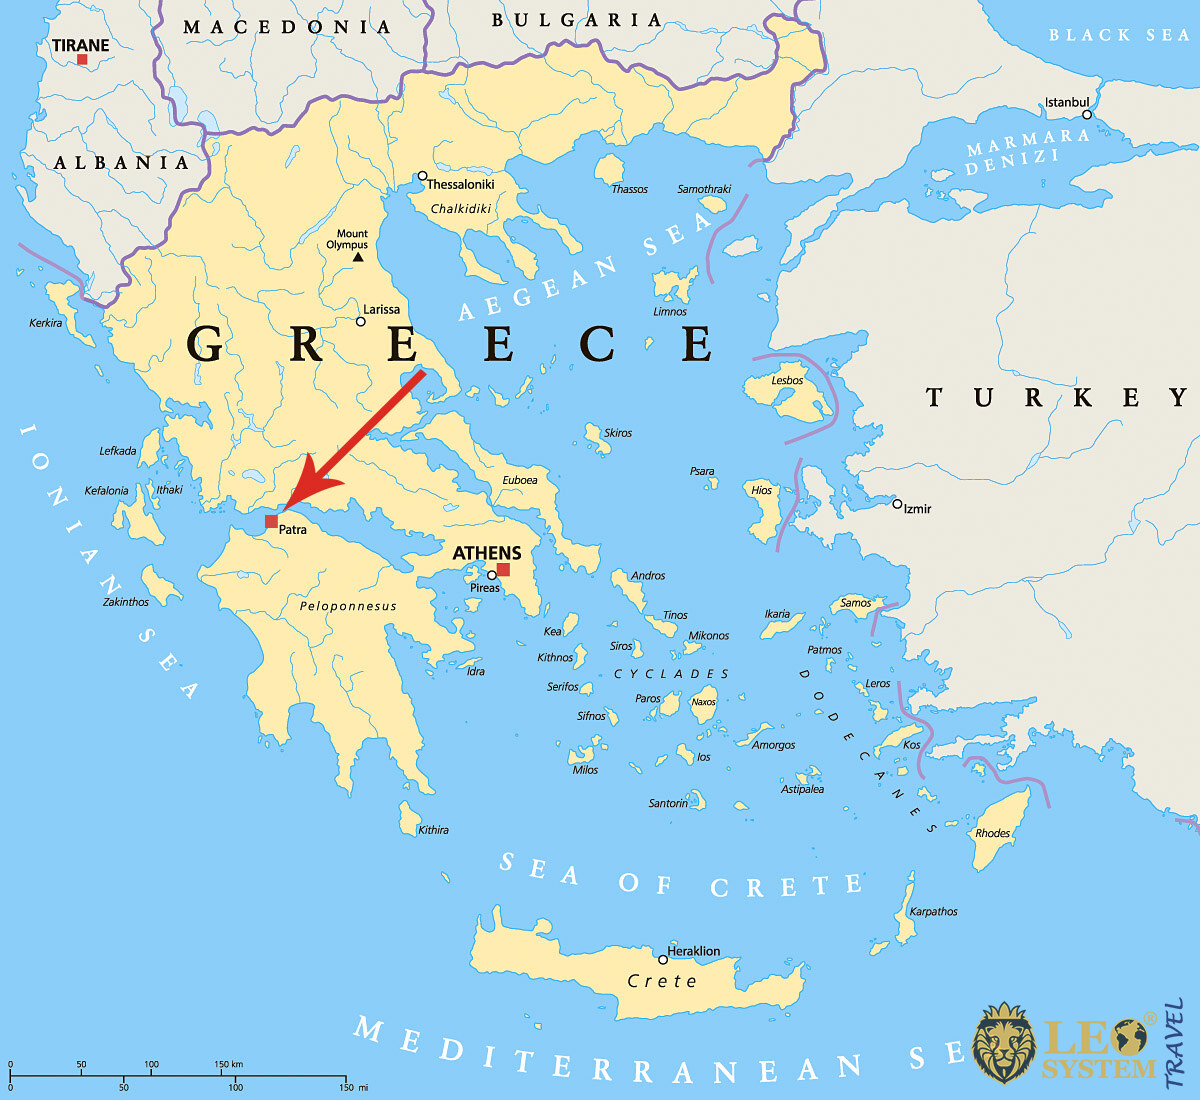 Image of a map showing the location of the city of Patras, Greece